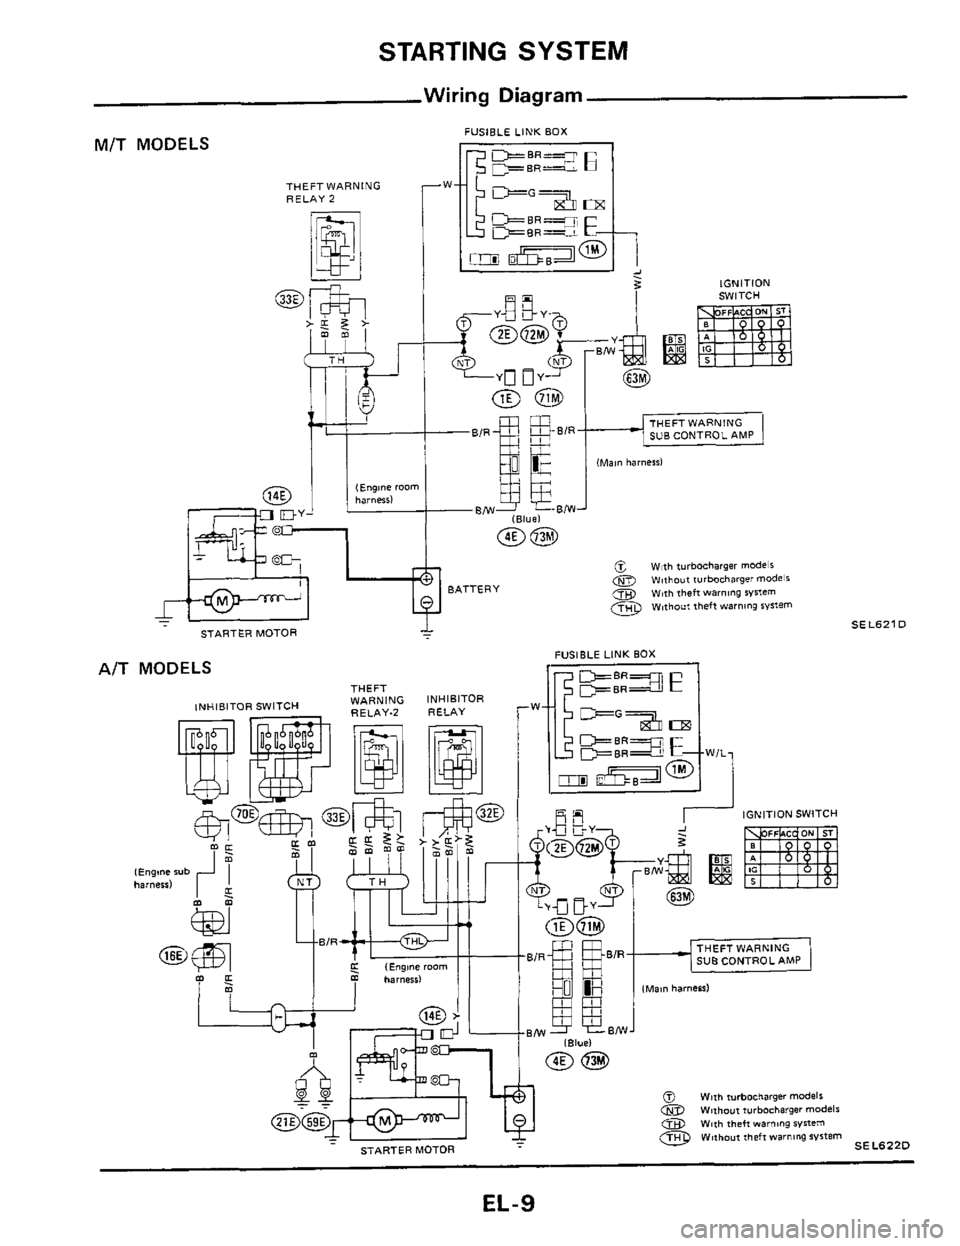 NISSAN 300ZX 1984 Z31 Electrical System Workshop Manual STARTING SYSTEM 
Wiring Diagram 
MIT MODELS FUSIBLE  LINK BOX 
THEFT WARNING 
RELAY  2 
IGNITION 
SWITCH 
-1 
- STARTER  MOTOR 
AIT MODELS 
lNHlBlTOR SWITCH 
BATTERY 
THEFT 
WARNING 
RELAY9 INHIBITOR 